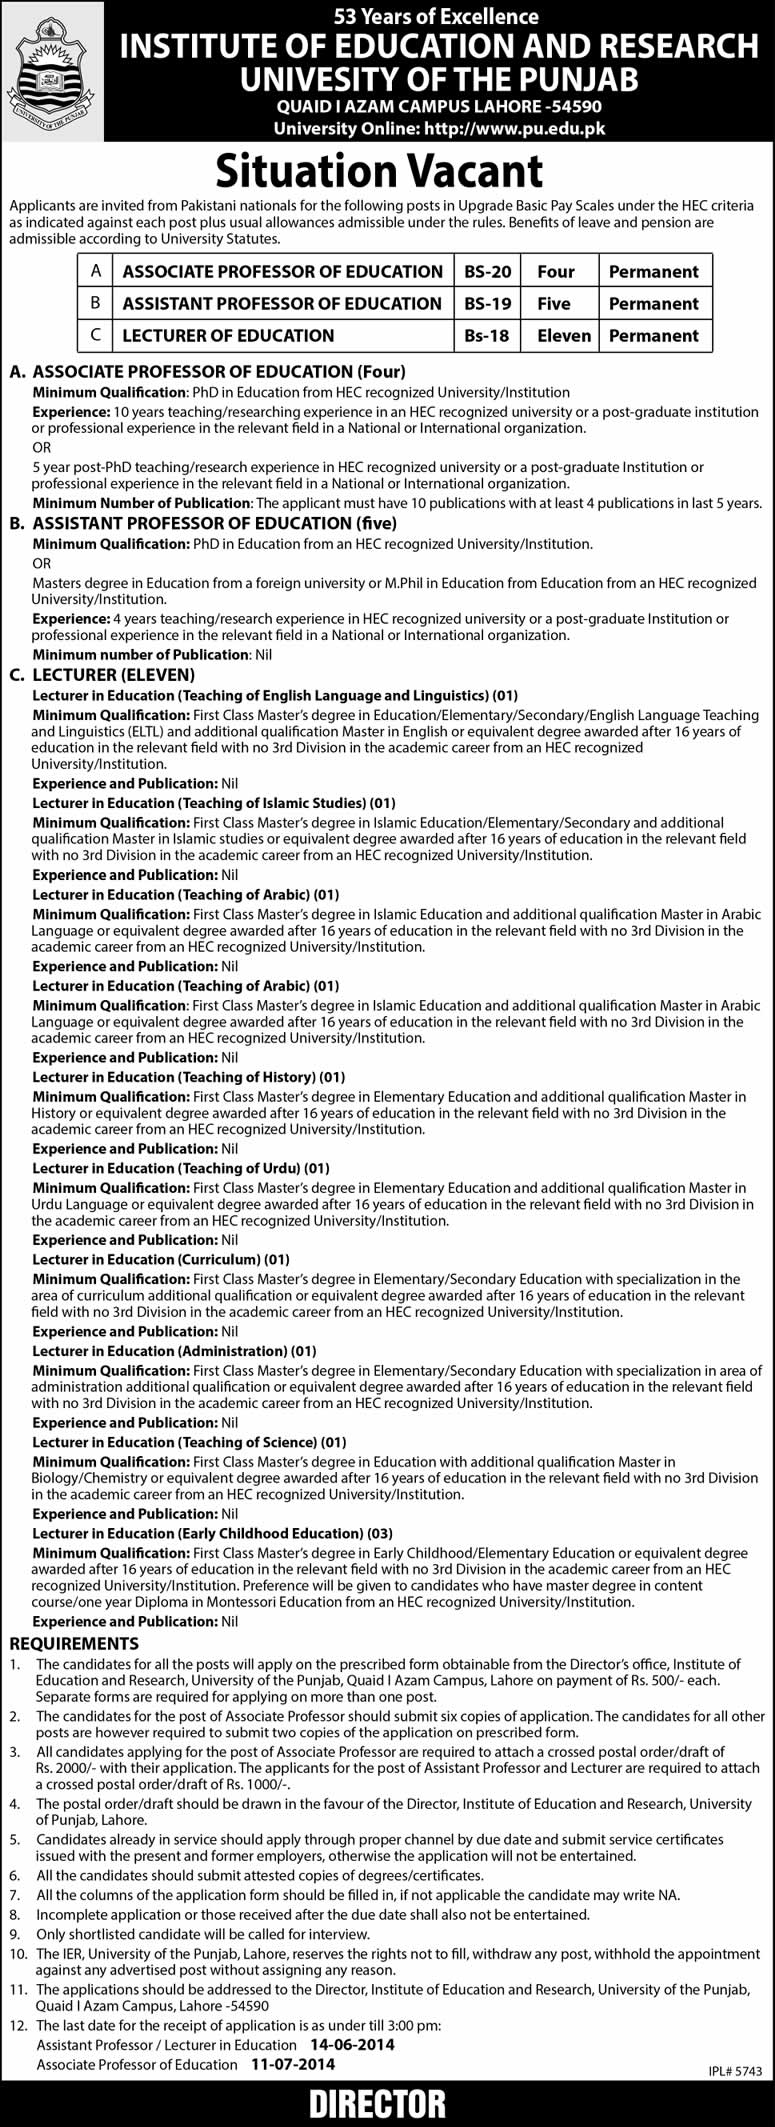 Punjab University Jobs 2014 May for Teaching Faculty at Institute of Education & Research